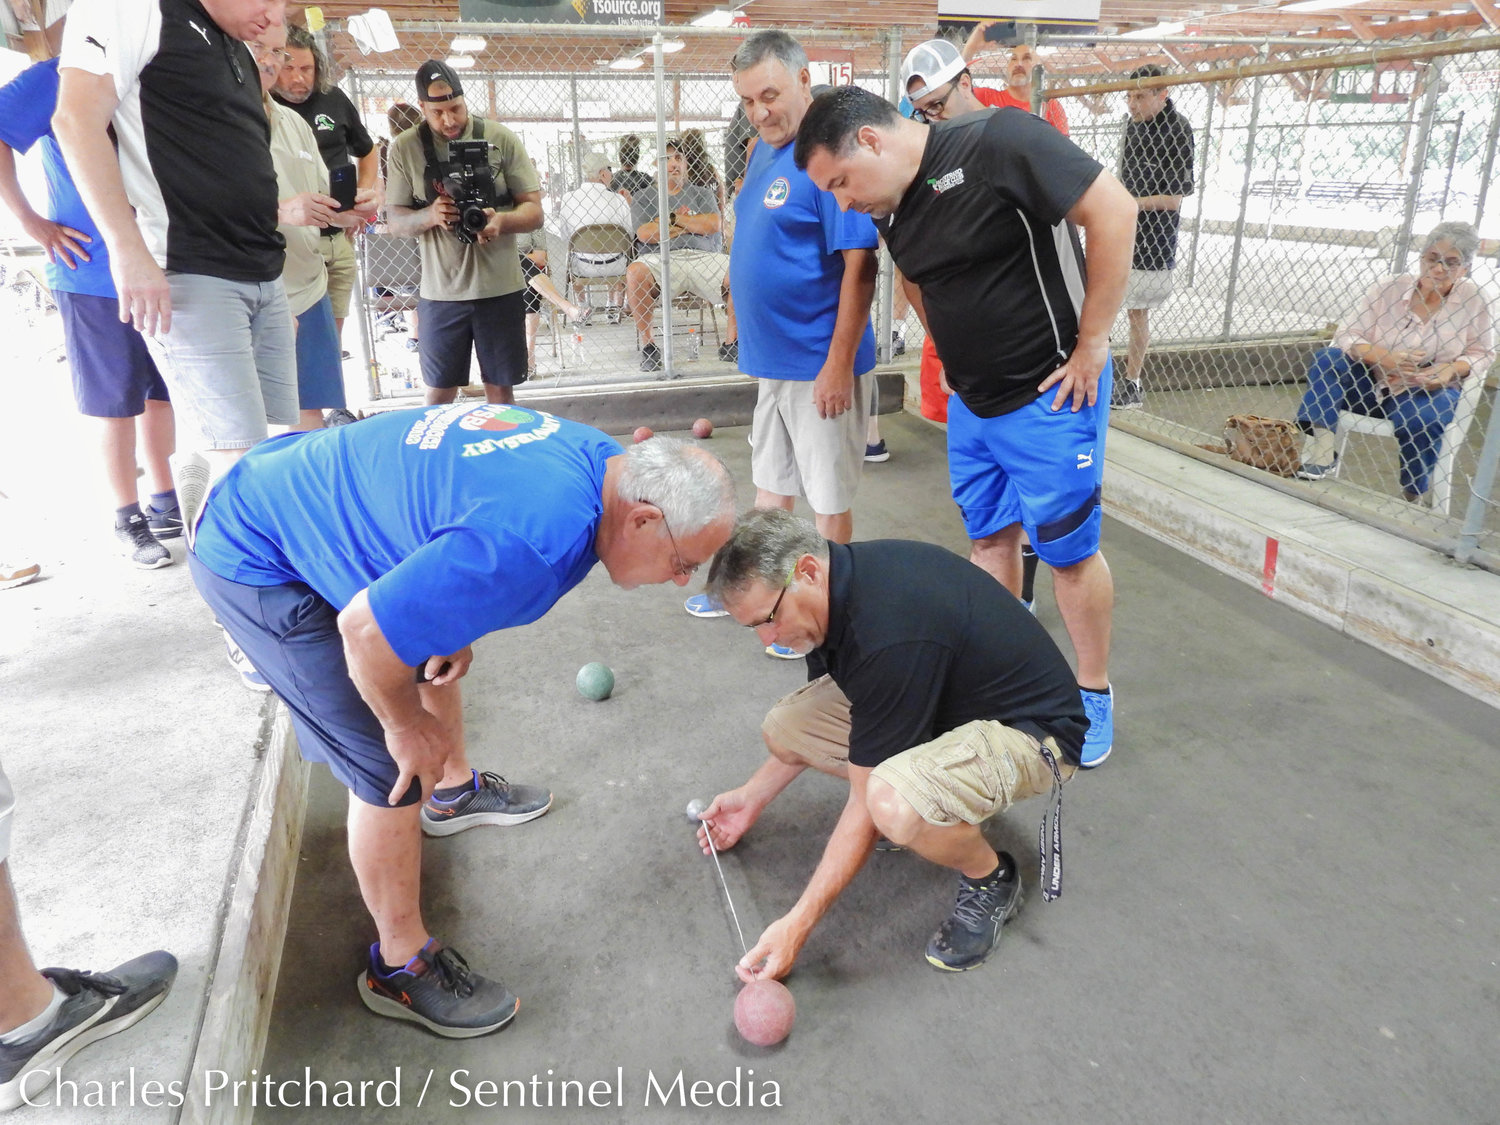 Finalists Tri-State Bocce and Club Vitu Lazio compete in the open division of the 47th World Series of Bocce Sunday at sun-drenched Toccolana Club in Rome. Pictured are World Series of Bocce officials Bernie Colangelo, left, and Todd Lanzi as they preform a measurement.